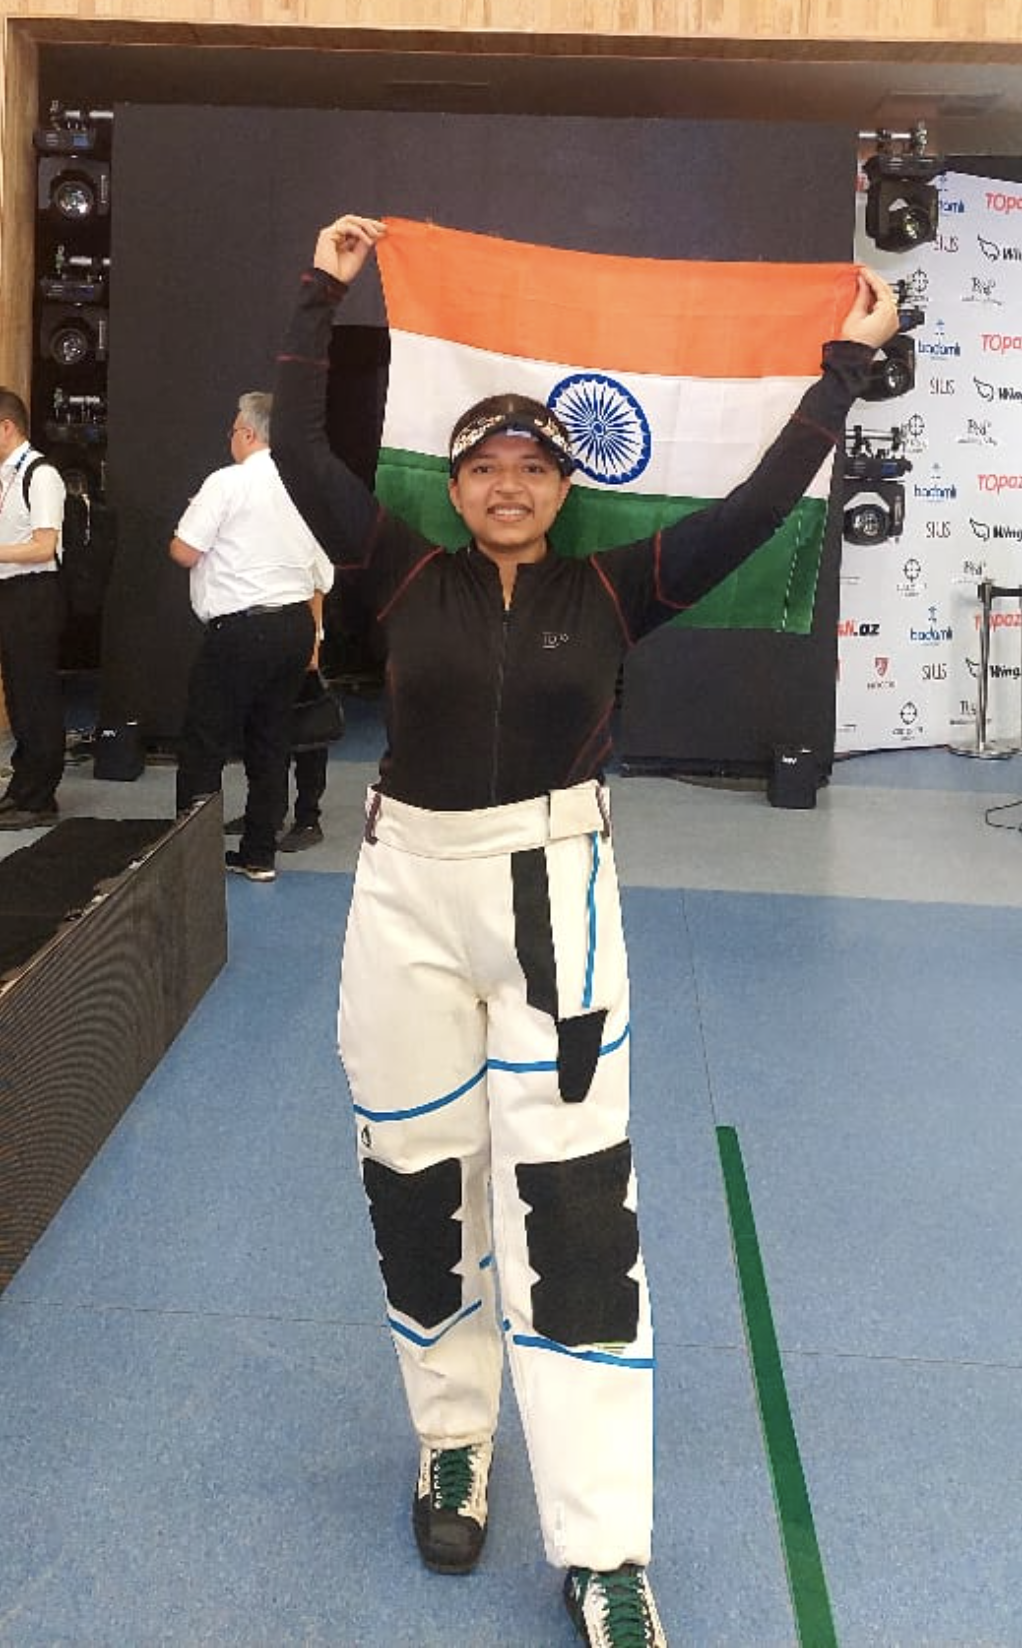 sift-kaur-samra-finishes-fifth-in-women’s-50-rifle-3-positions-at-baku-shooting-worlds,-wins-india’s-sixth-paris-quota-in-shooting